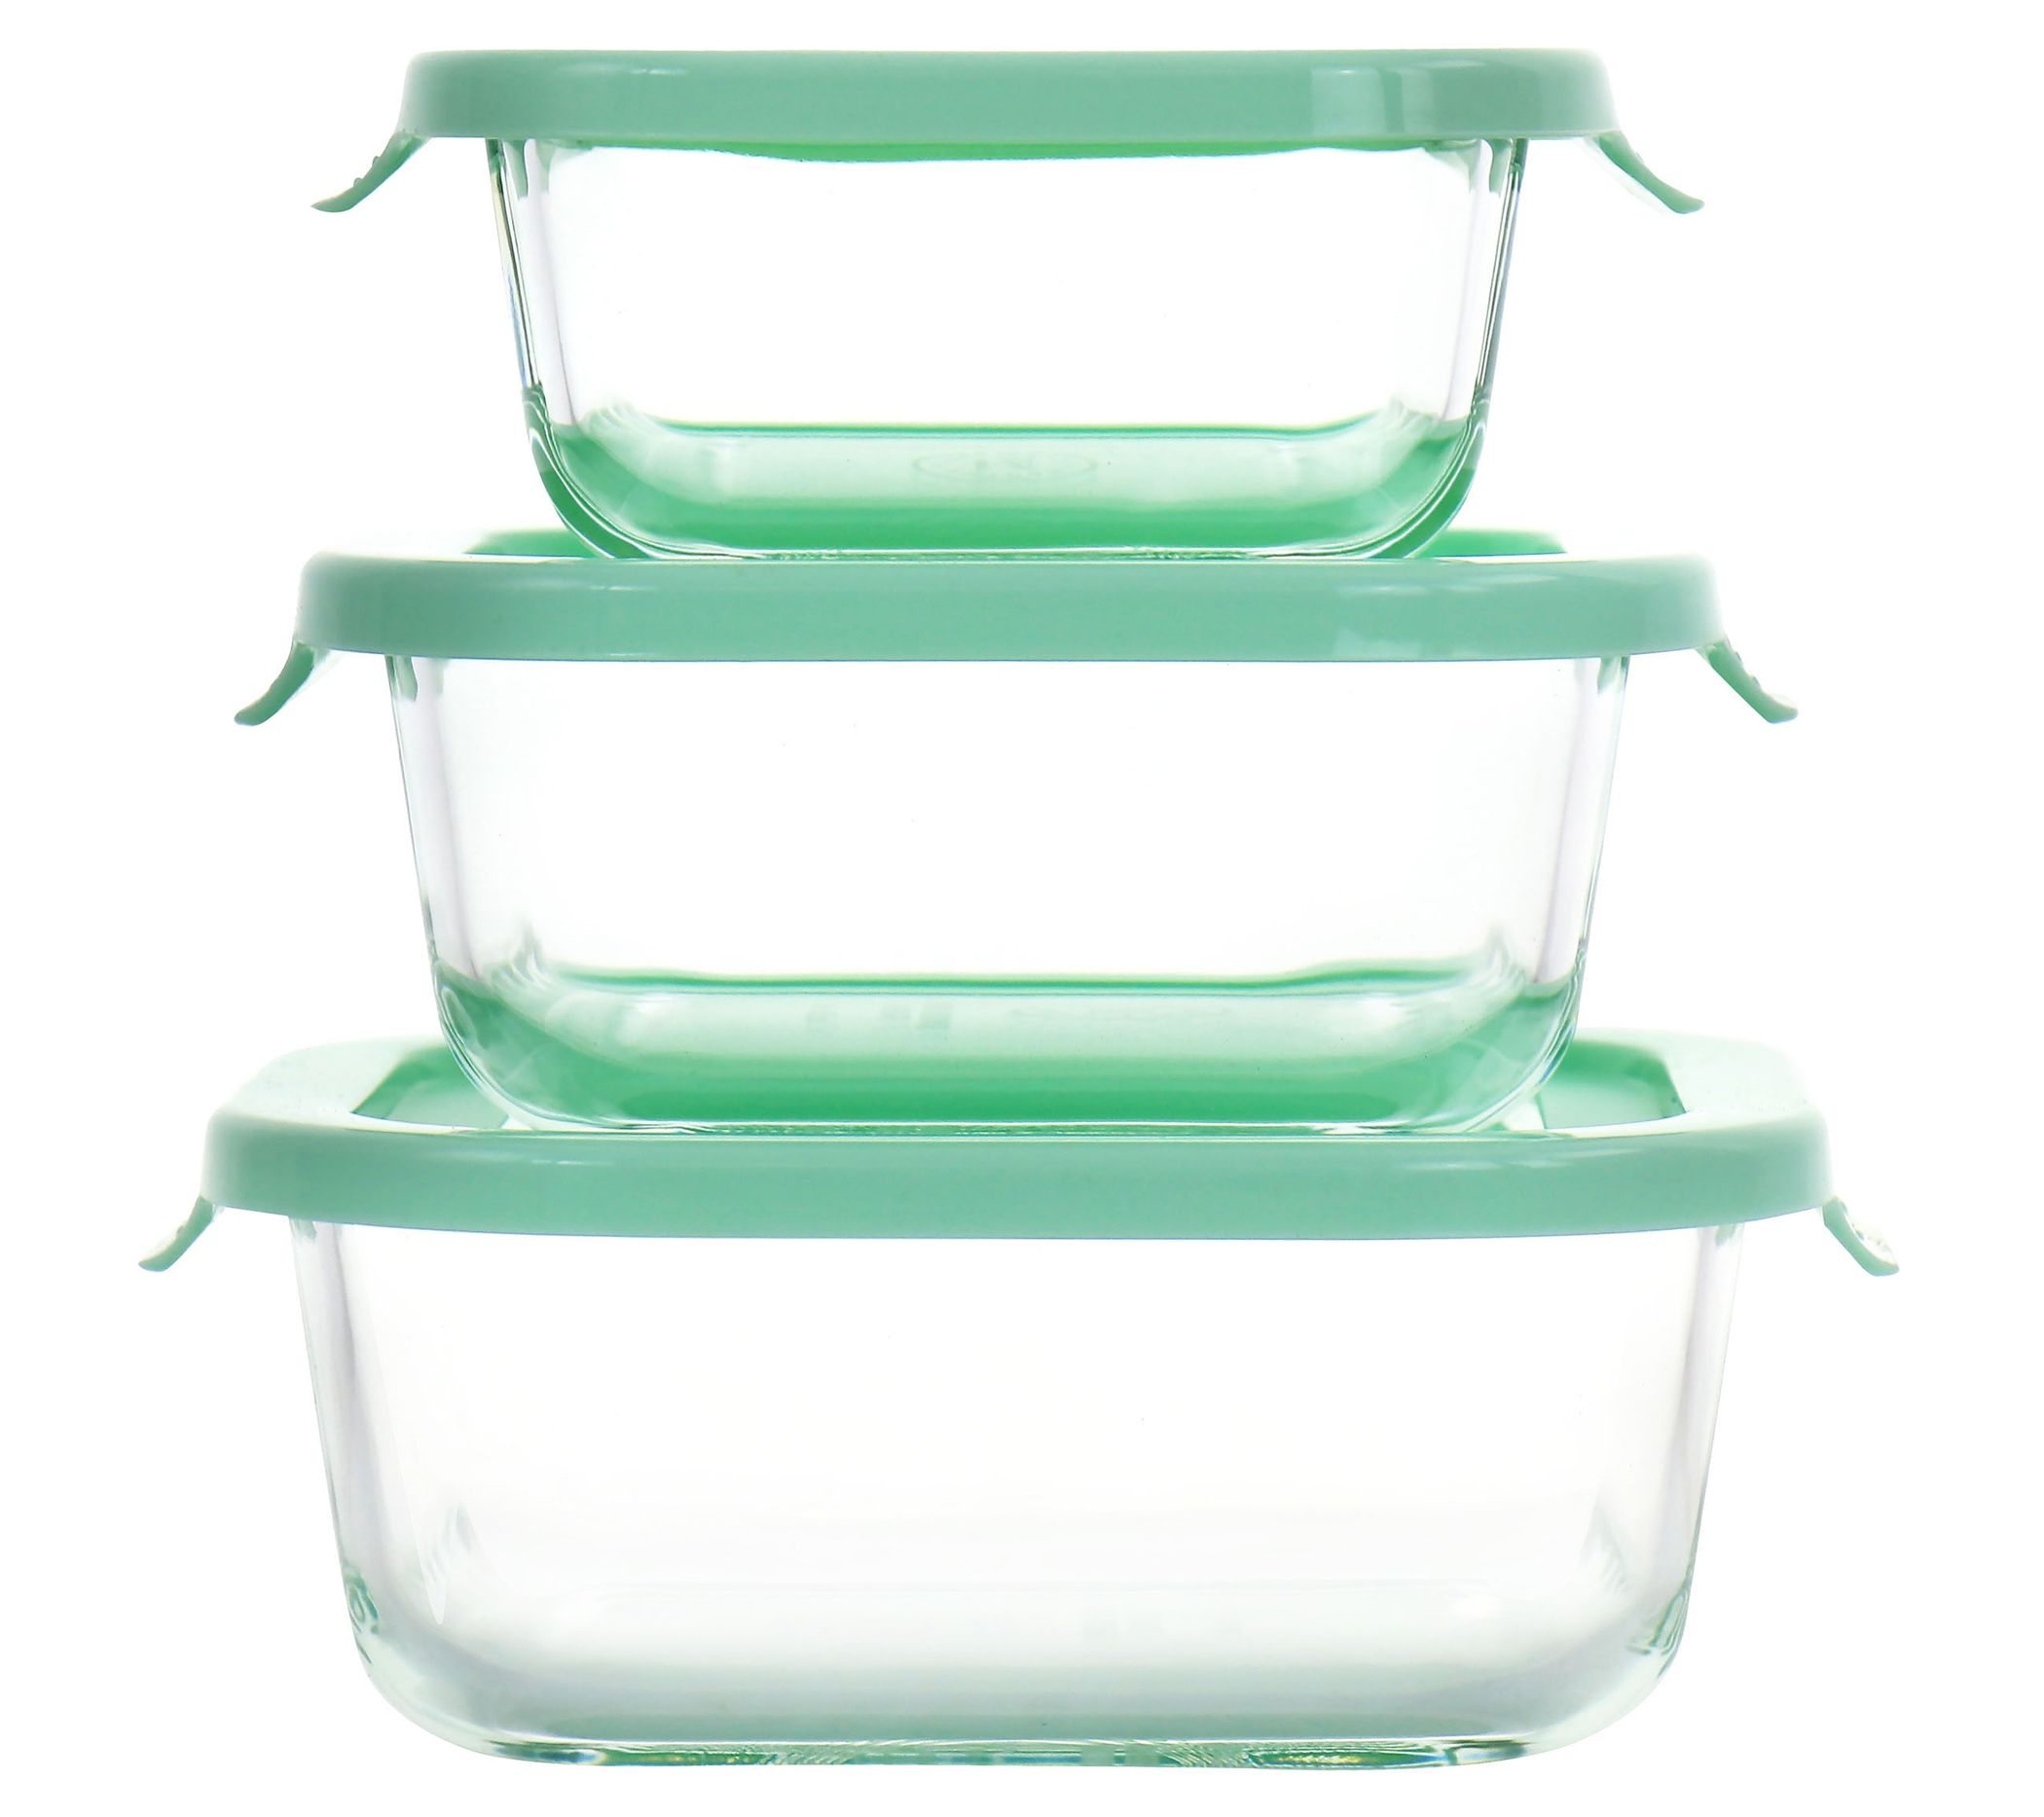 Oxo 16pc Smart Seal Glass Food Container Set Food Storage Review - Consumer  Reports